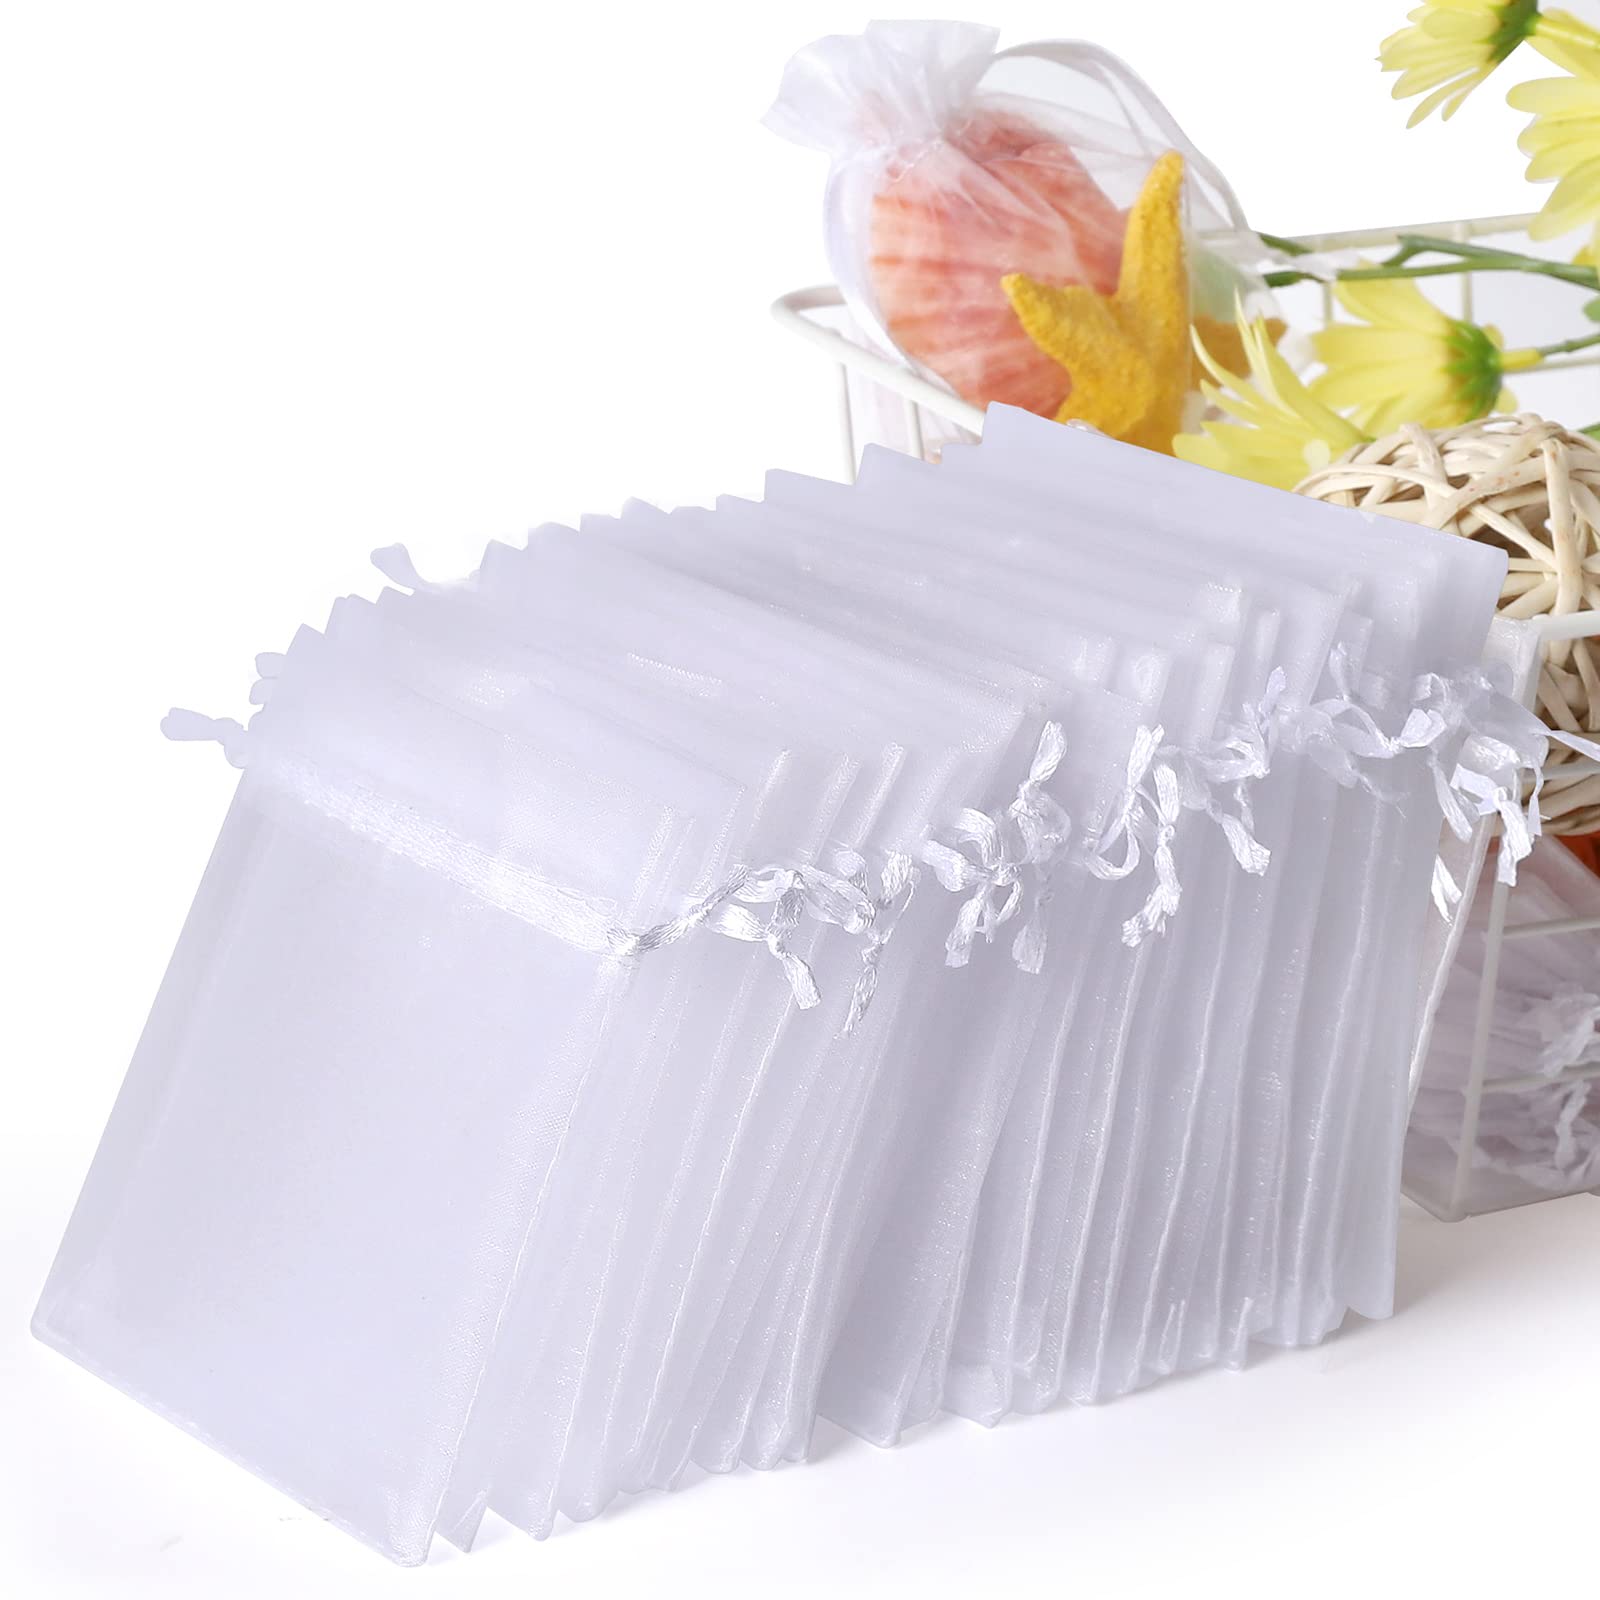 WenTao 100PCS 4x6 (10x15cm) White Sheer Organza Bags for Wedding Favor With Drawstring, Premium Jewelry Pouches Party for Festival Gift ,Candy , Fruit Protection